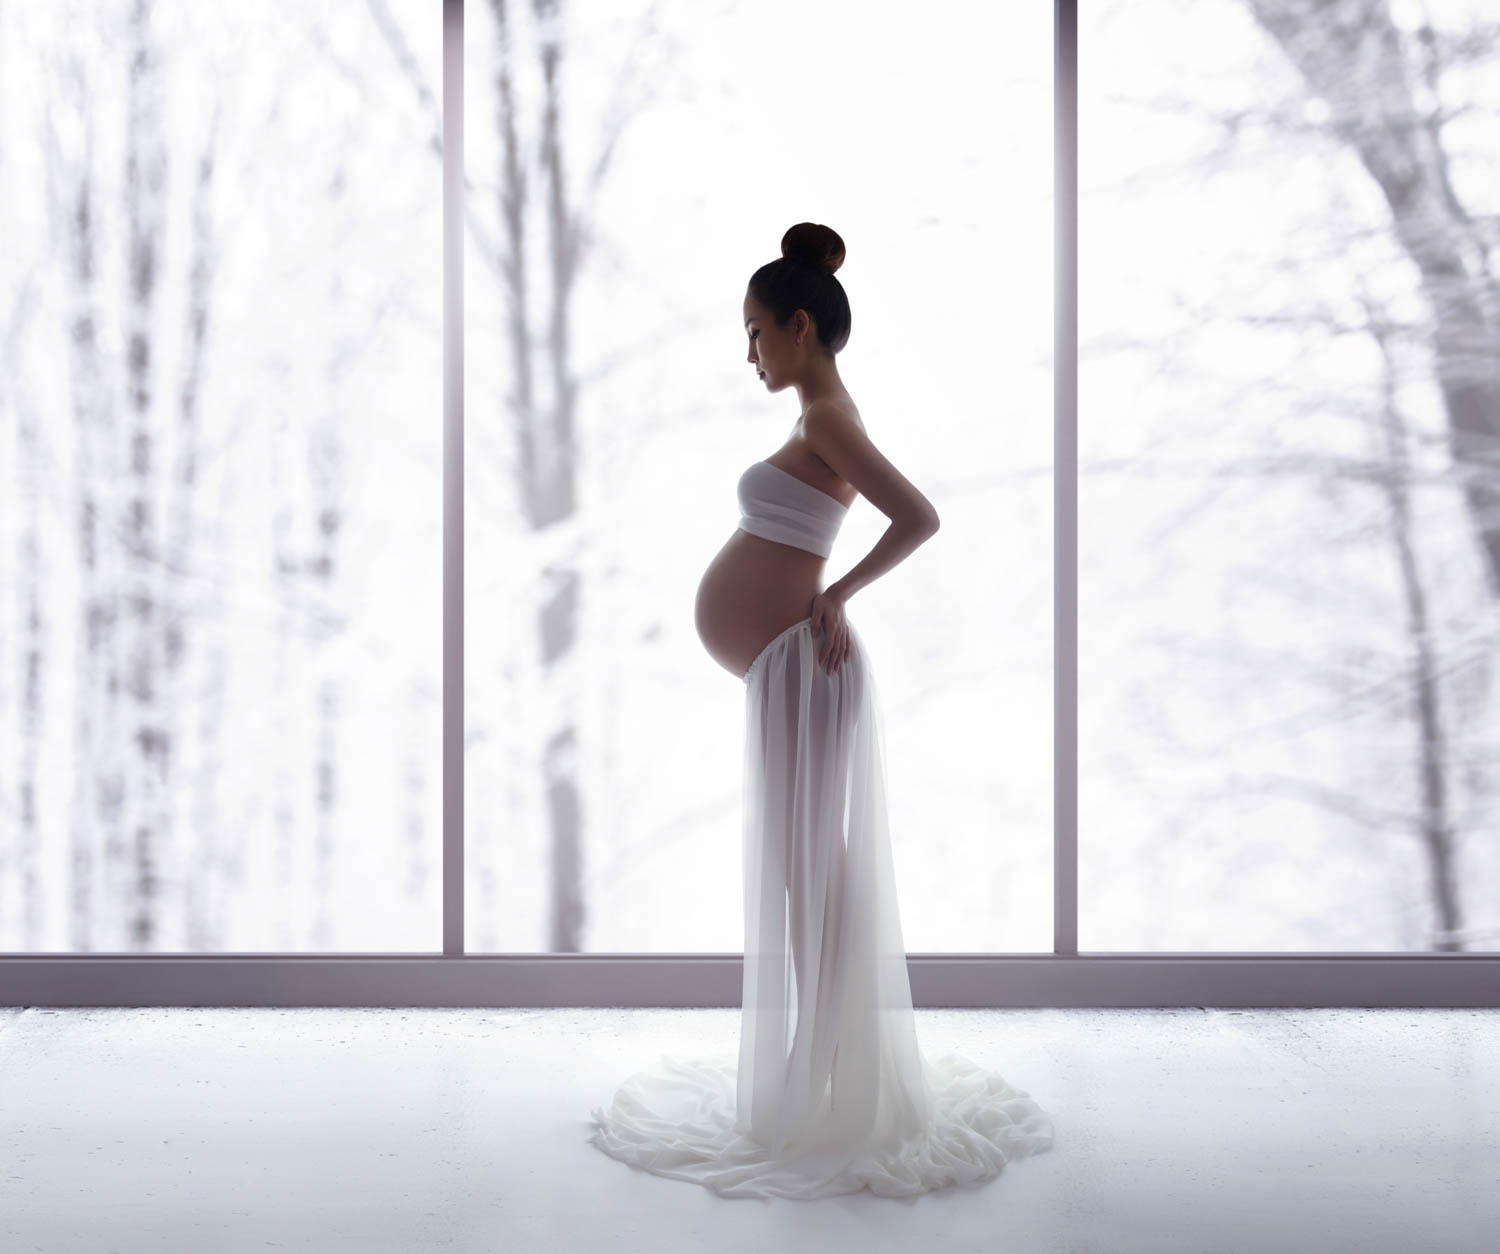 Best maternity photographer in NYC, fine-art pregnancy photography, artistic maternity and newborn photos, NYC